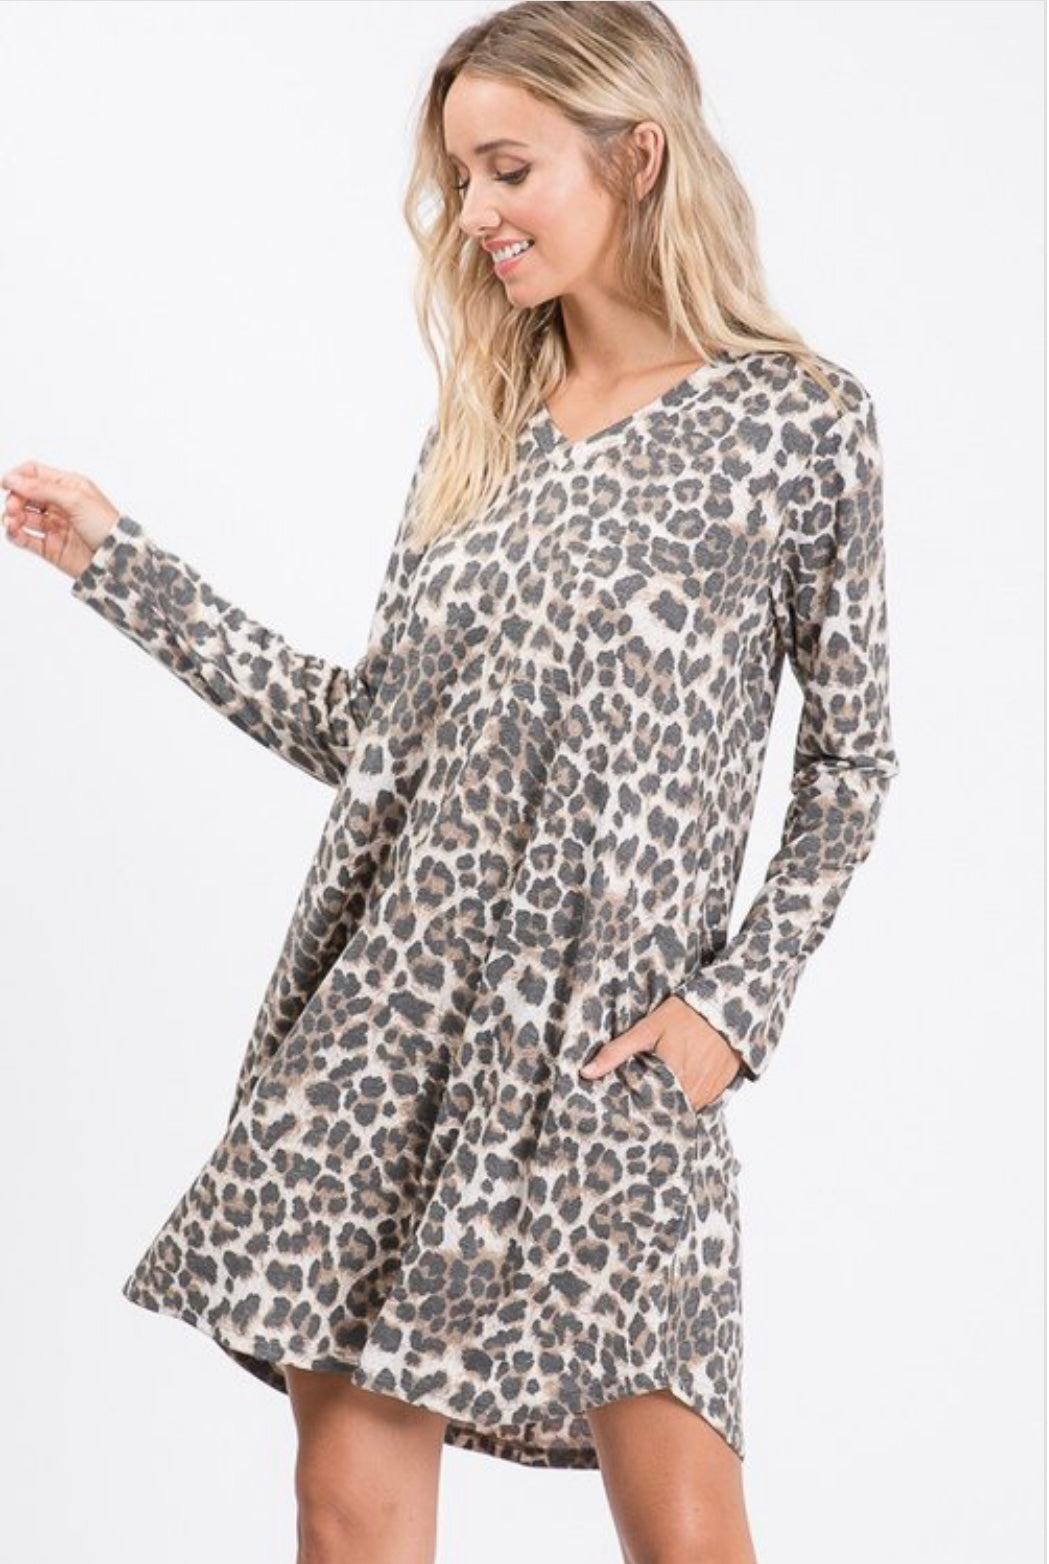 Leah Animal Print Dress - Corinne Boutique Family Owned and Operated USA